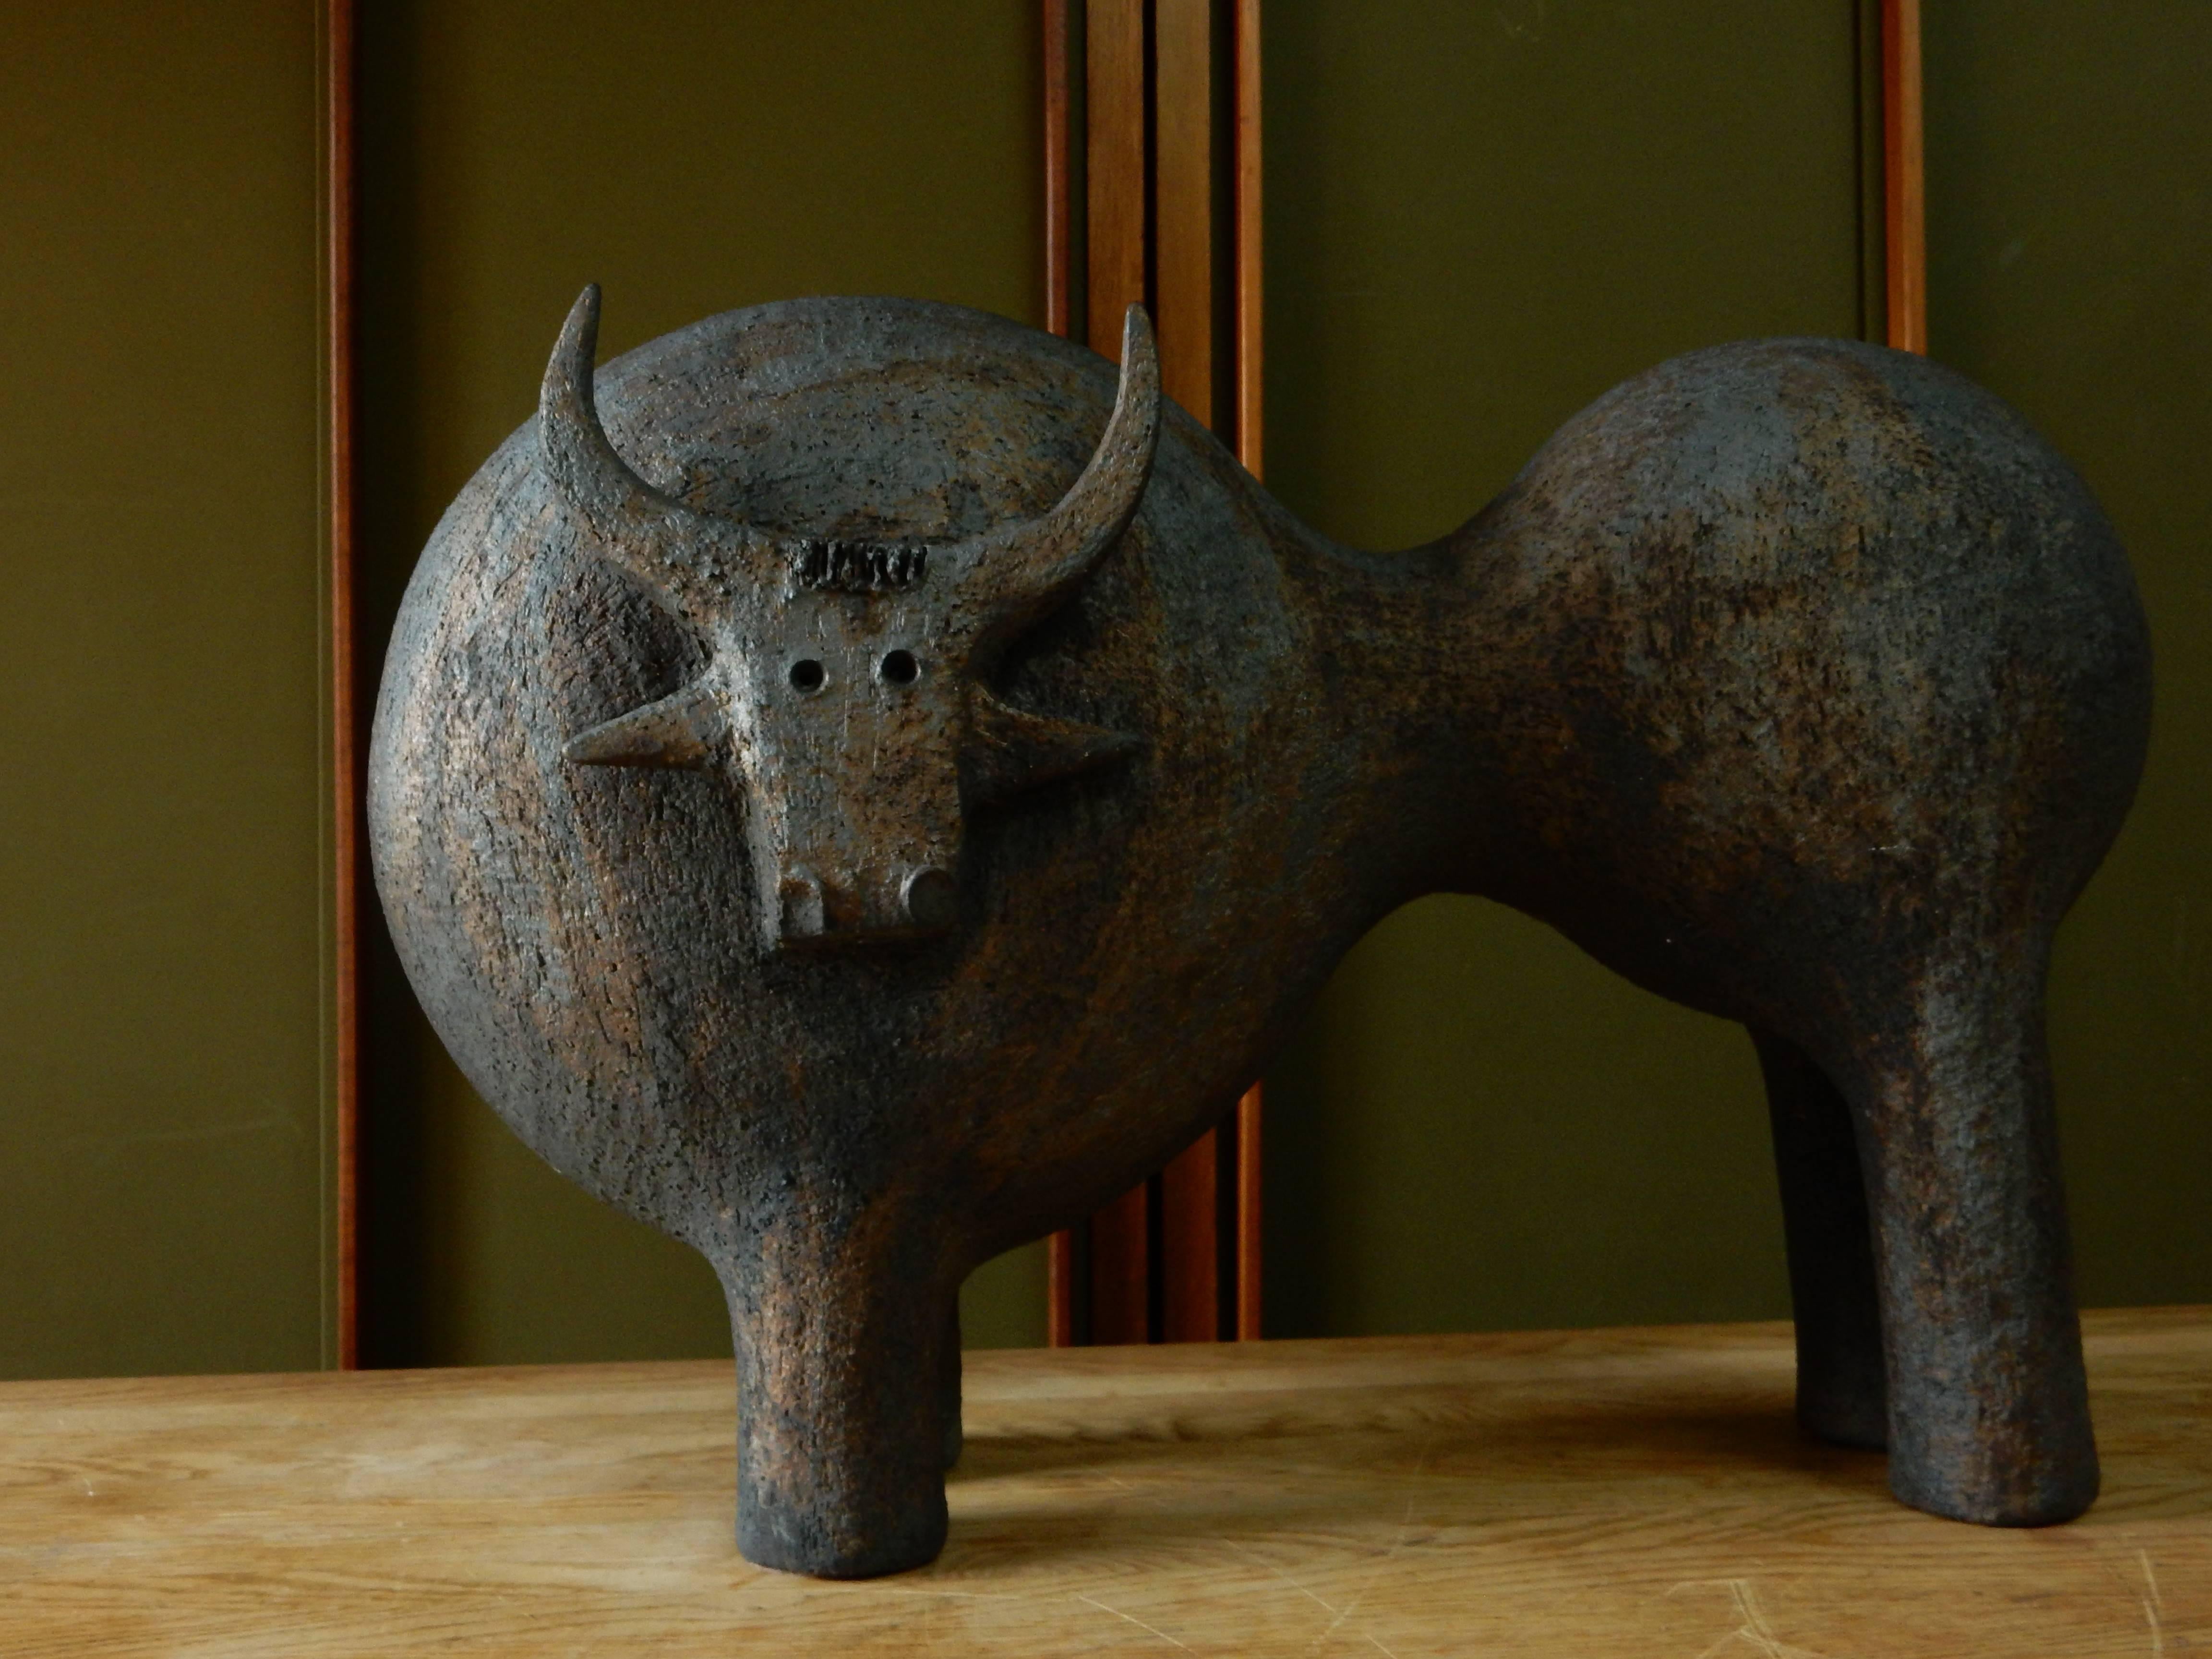 Bull by Dominique Pouchain..(Dieulefit, Drôme).
Most recent ceramic work from the artist.